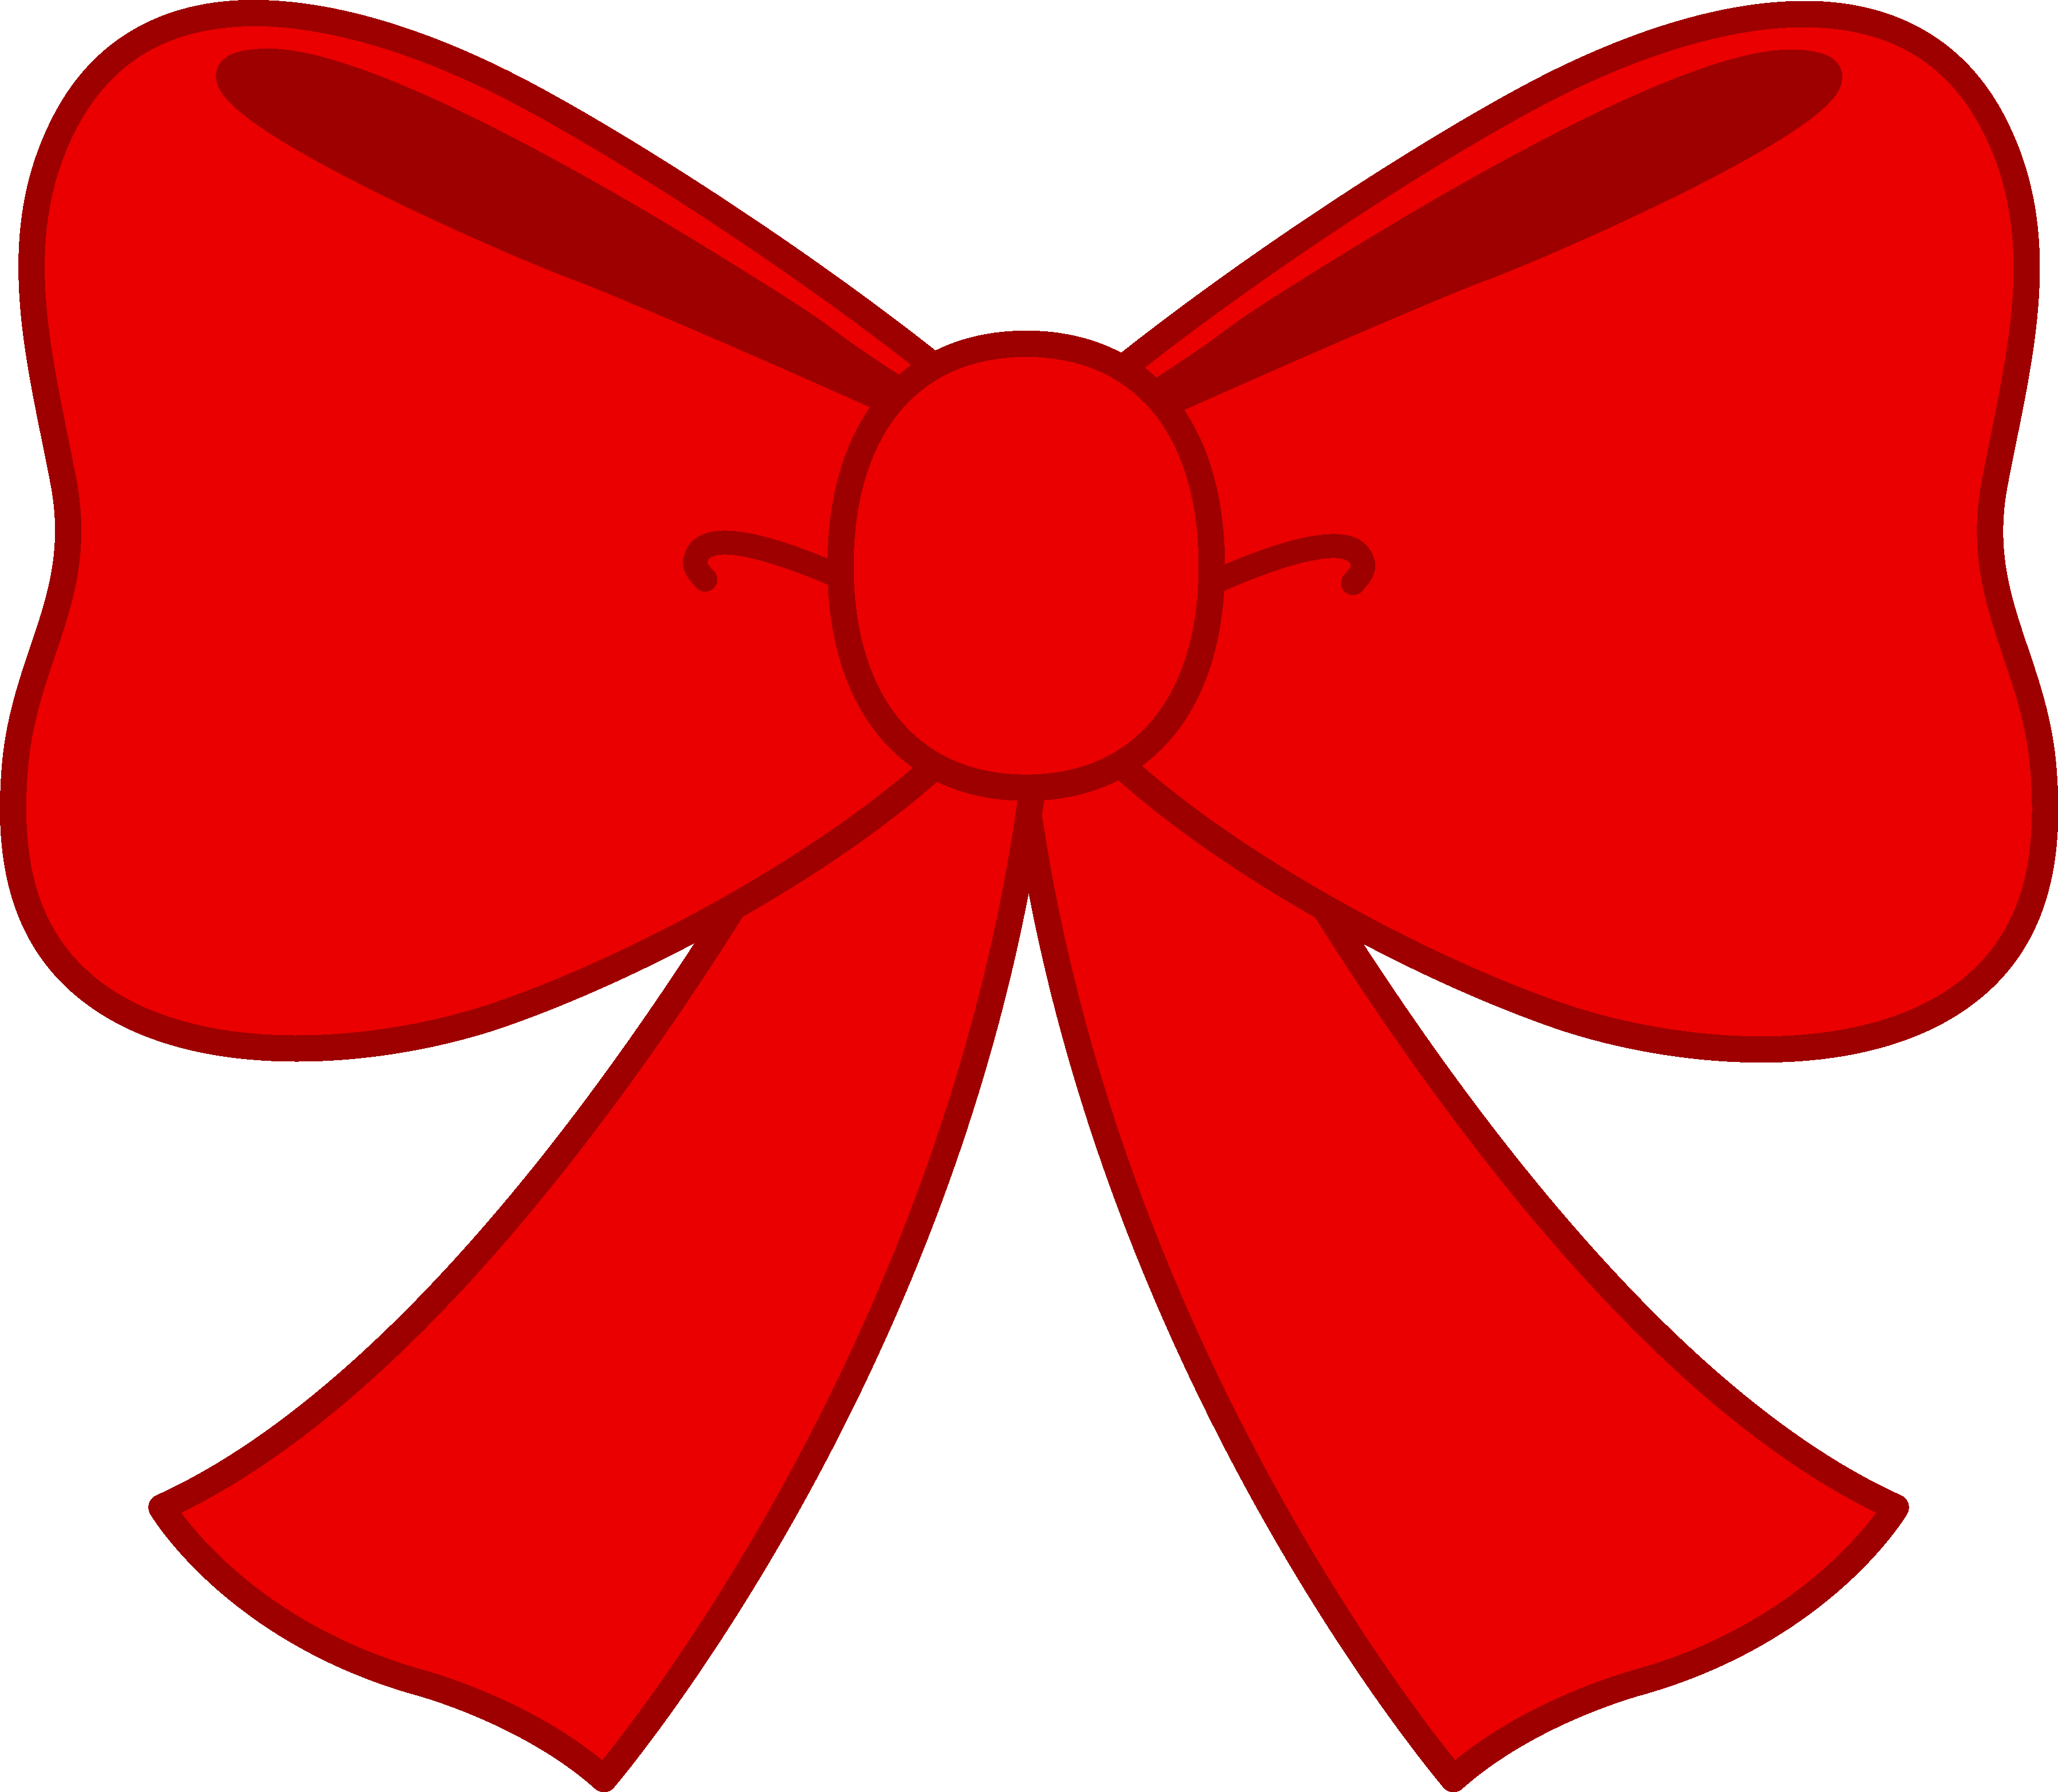 Red ribbon clipart no background